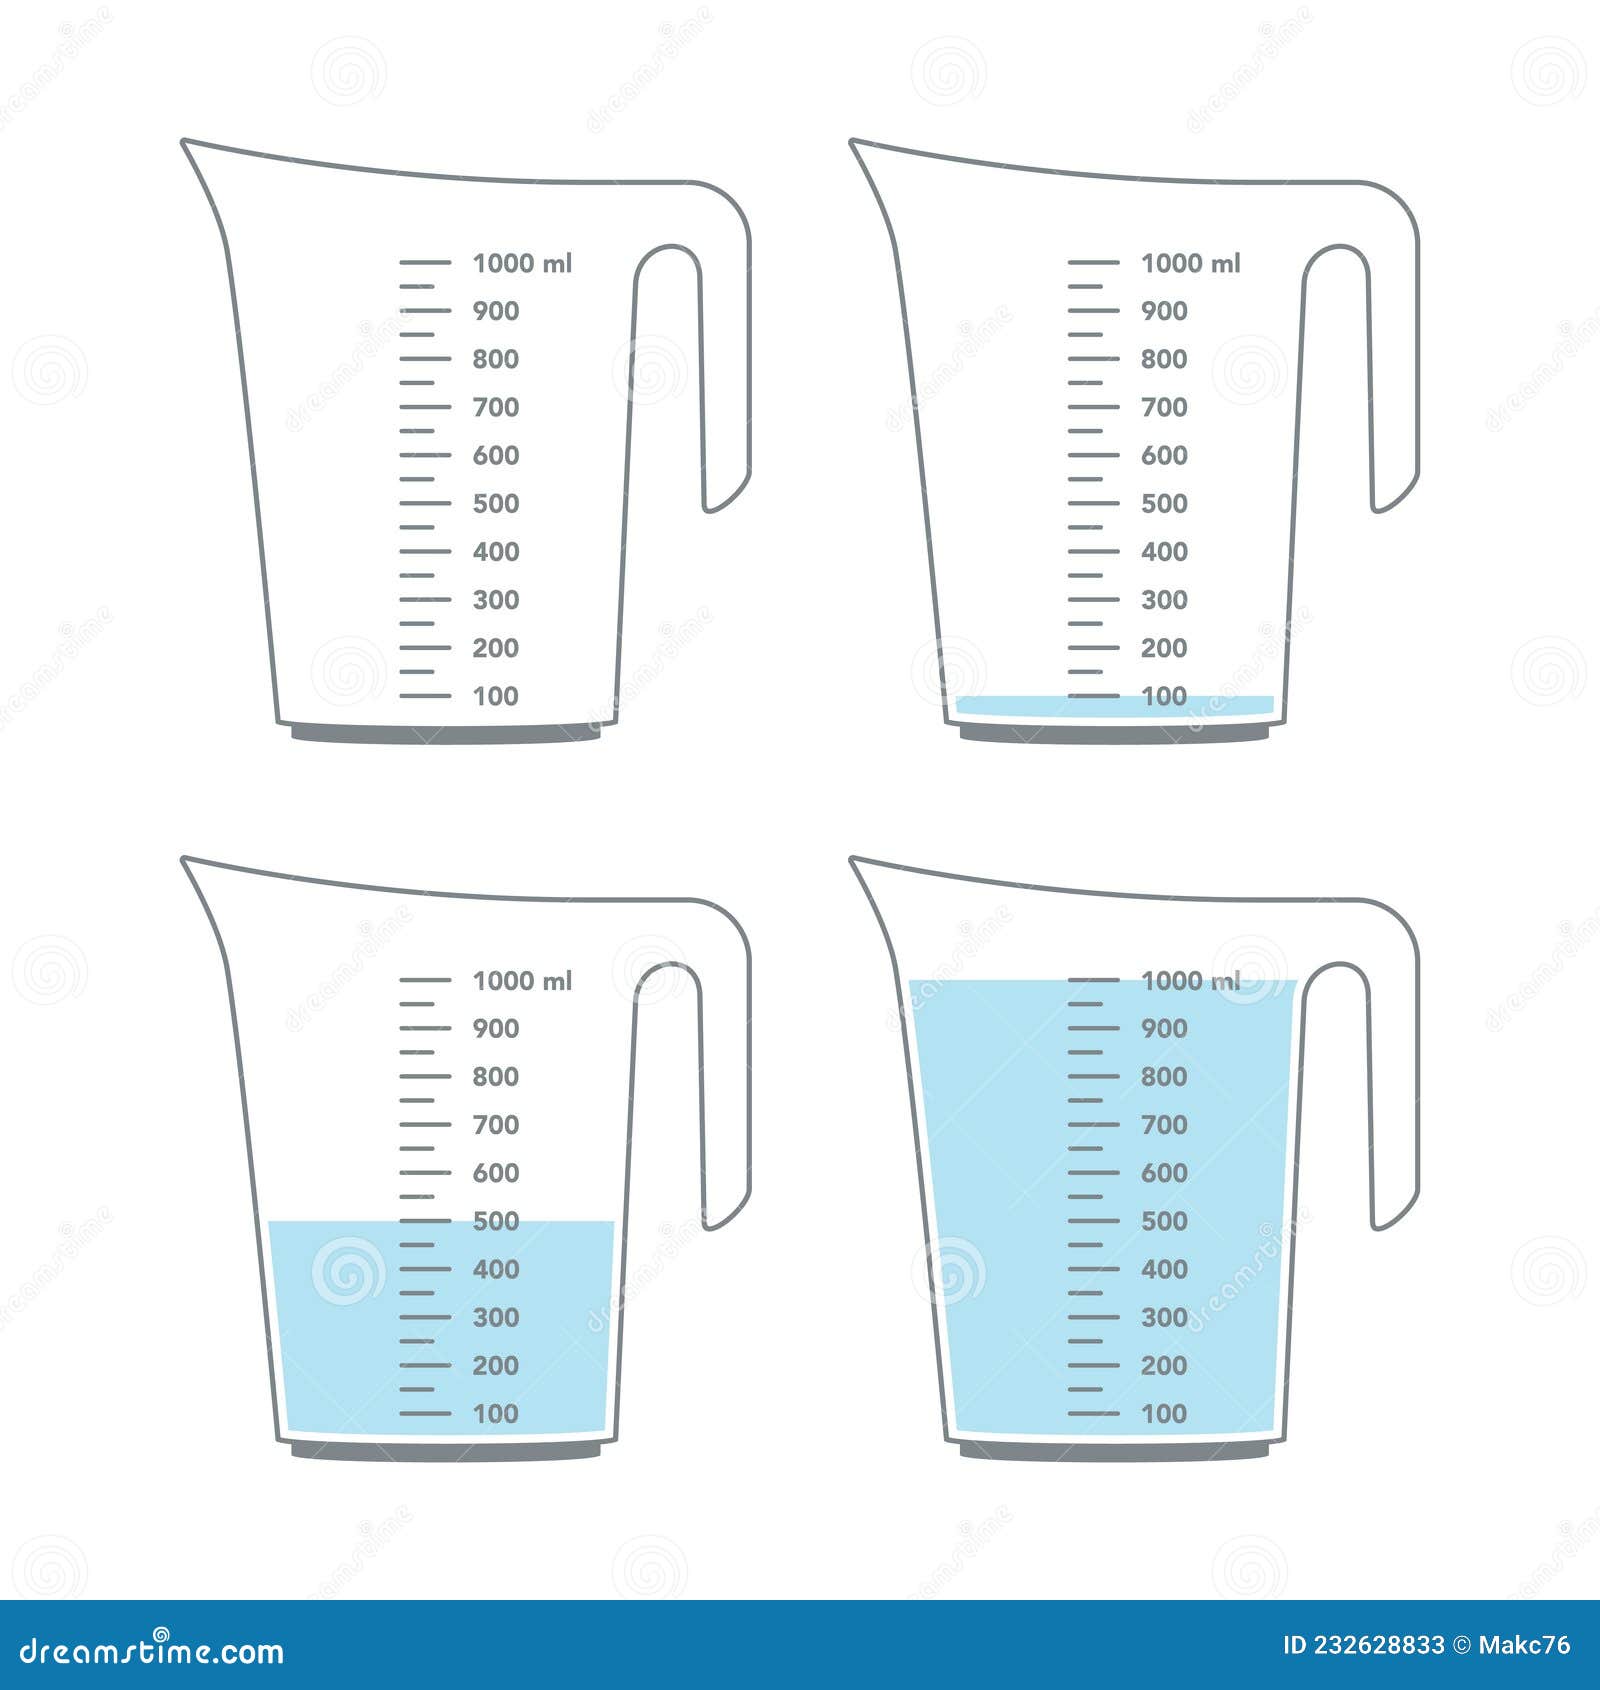 https://thumbs.dreamstime.com/z/kitchen-measuring-cups-various-amount-liquid-jug-scale-beaker-chemical-experiments-laboratory-vector-232628833.jpg